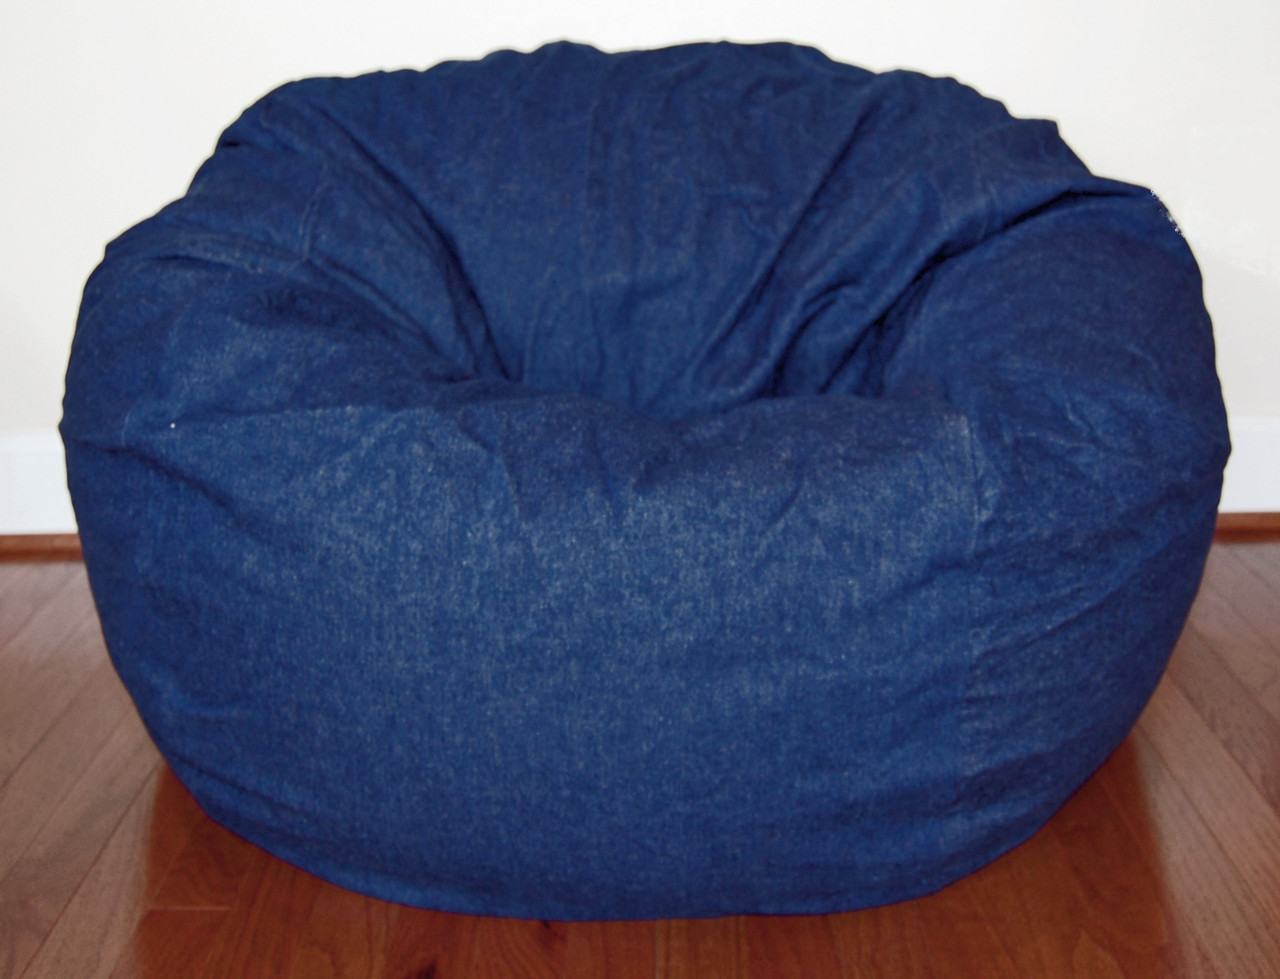 Flash Furniture Oversized Denim Refillable Bean Bag Chair for All Ages -  Walmart.com